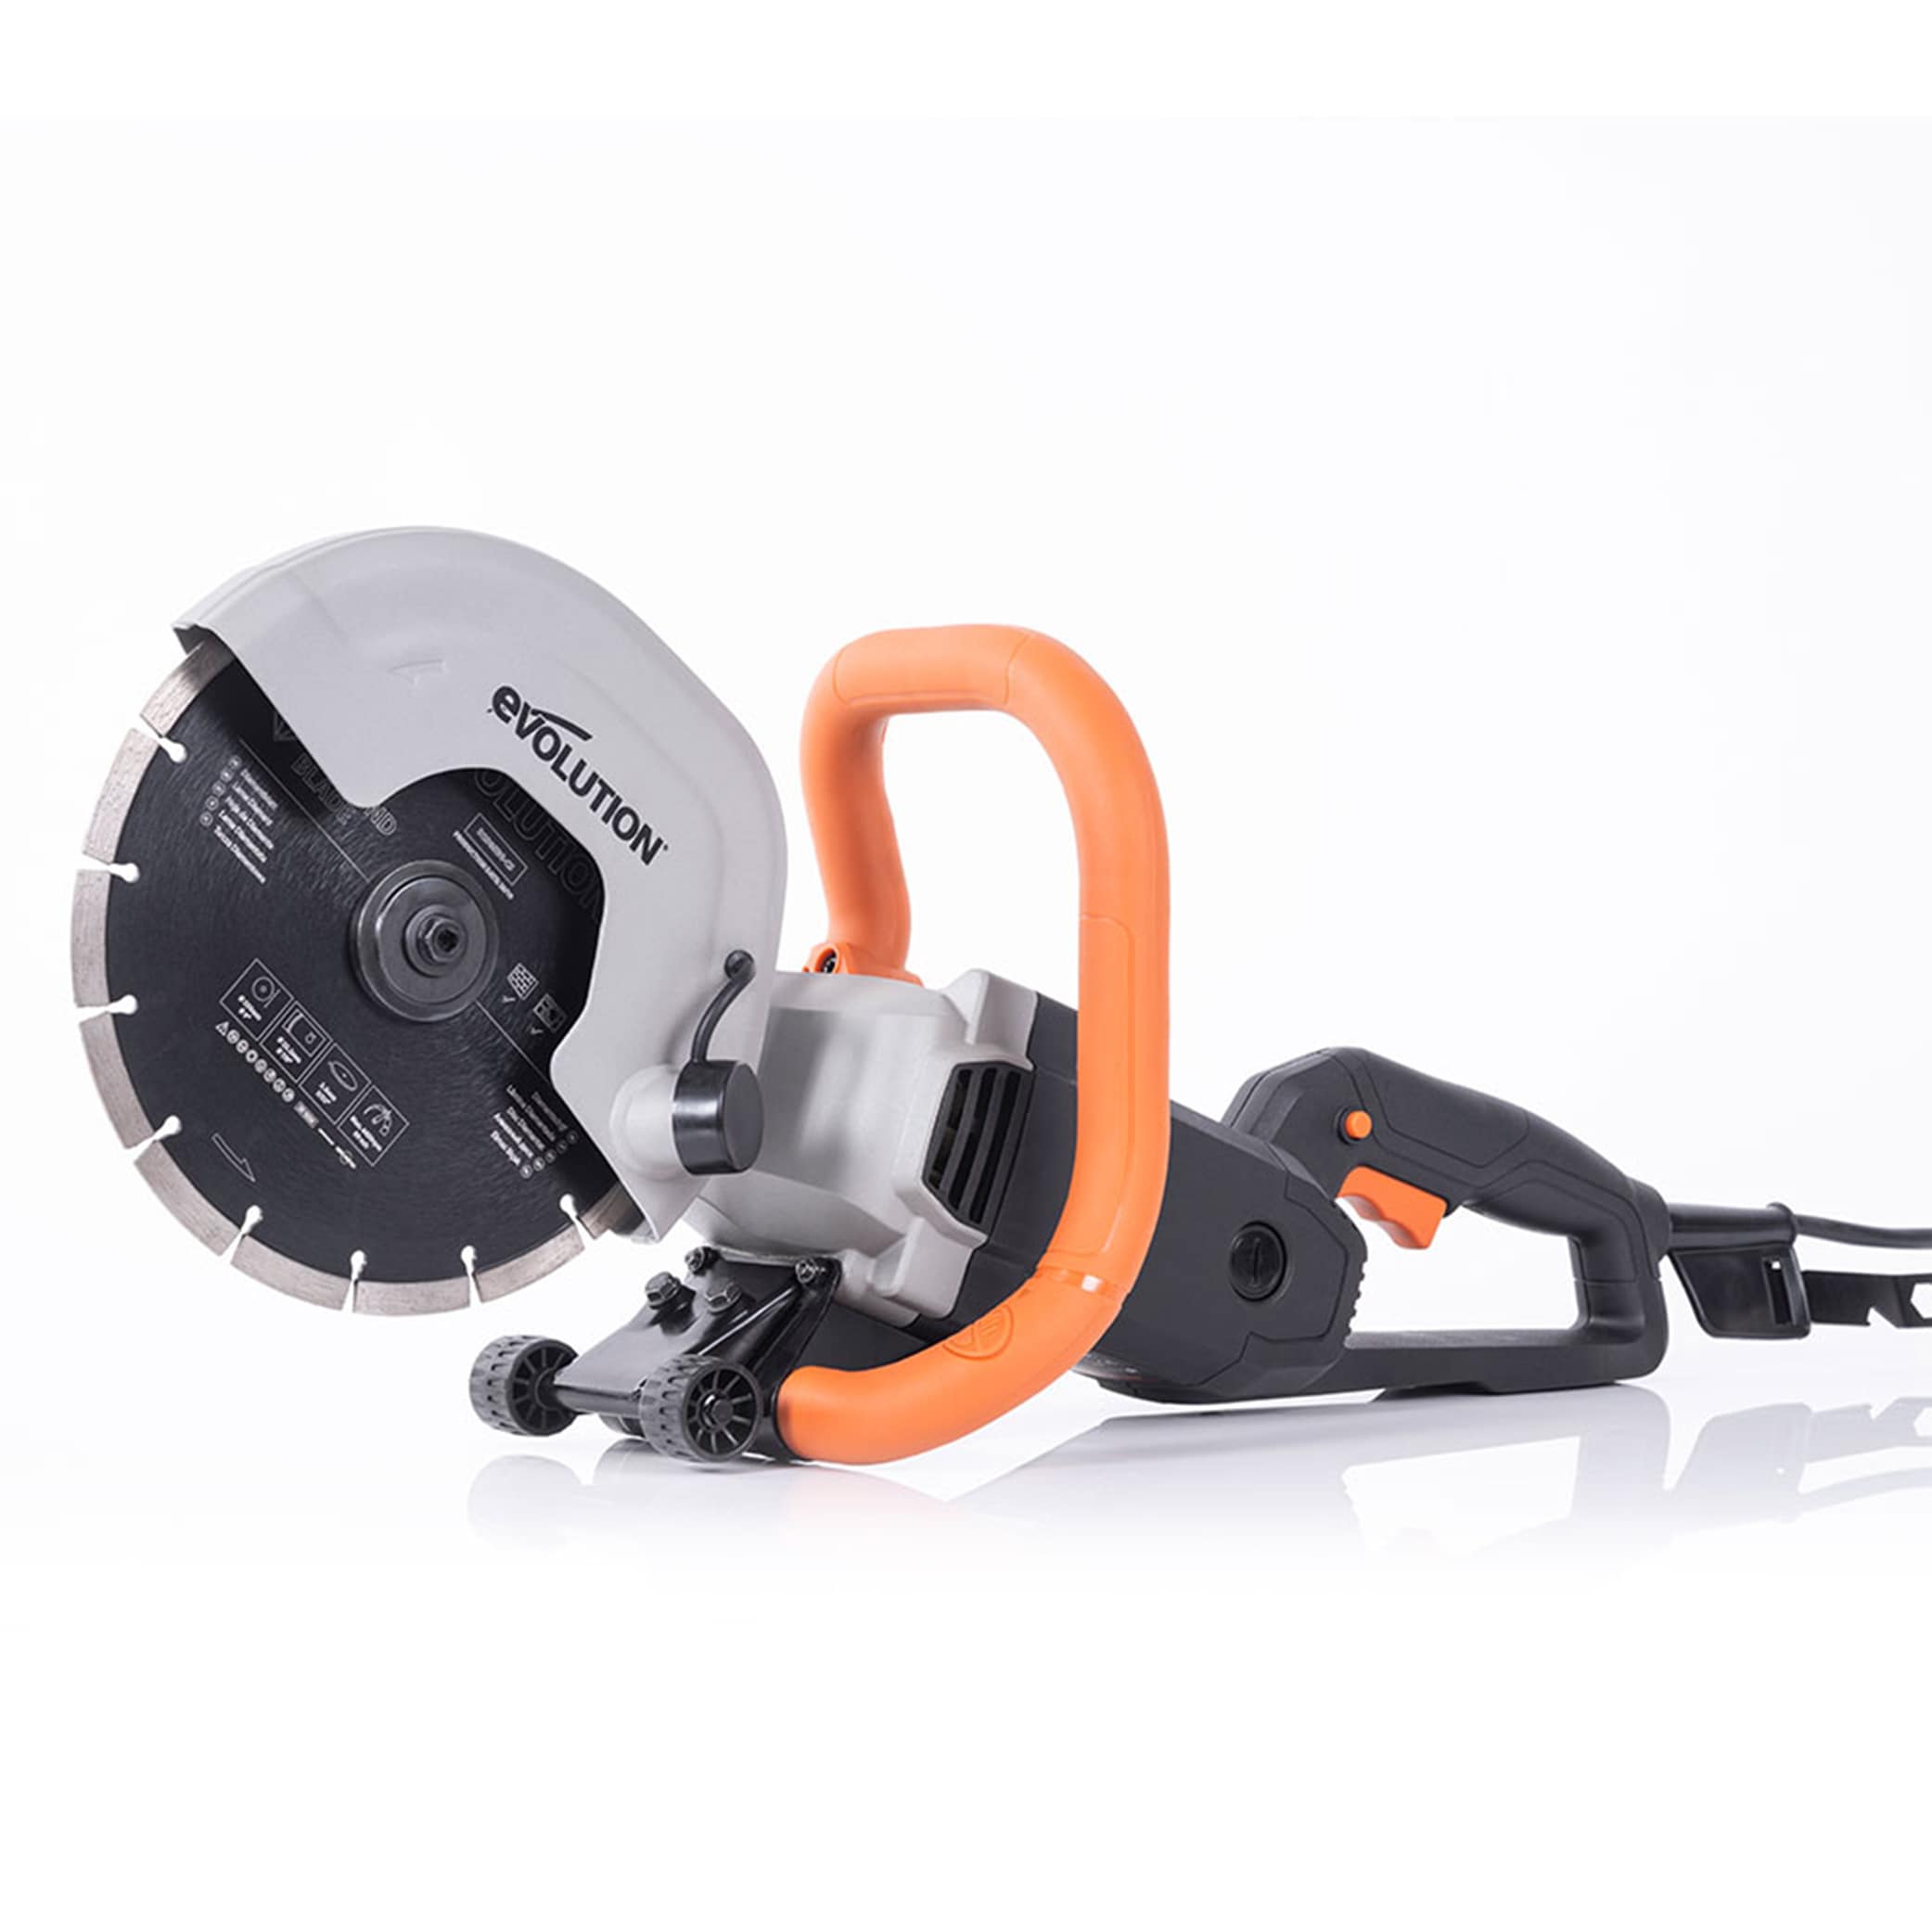 Evolution R230DCT 9-in Corded Concrete Saw in the Concrete Saws department  at